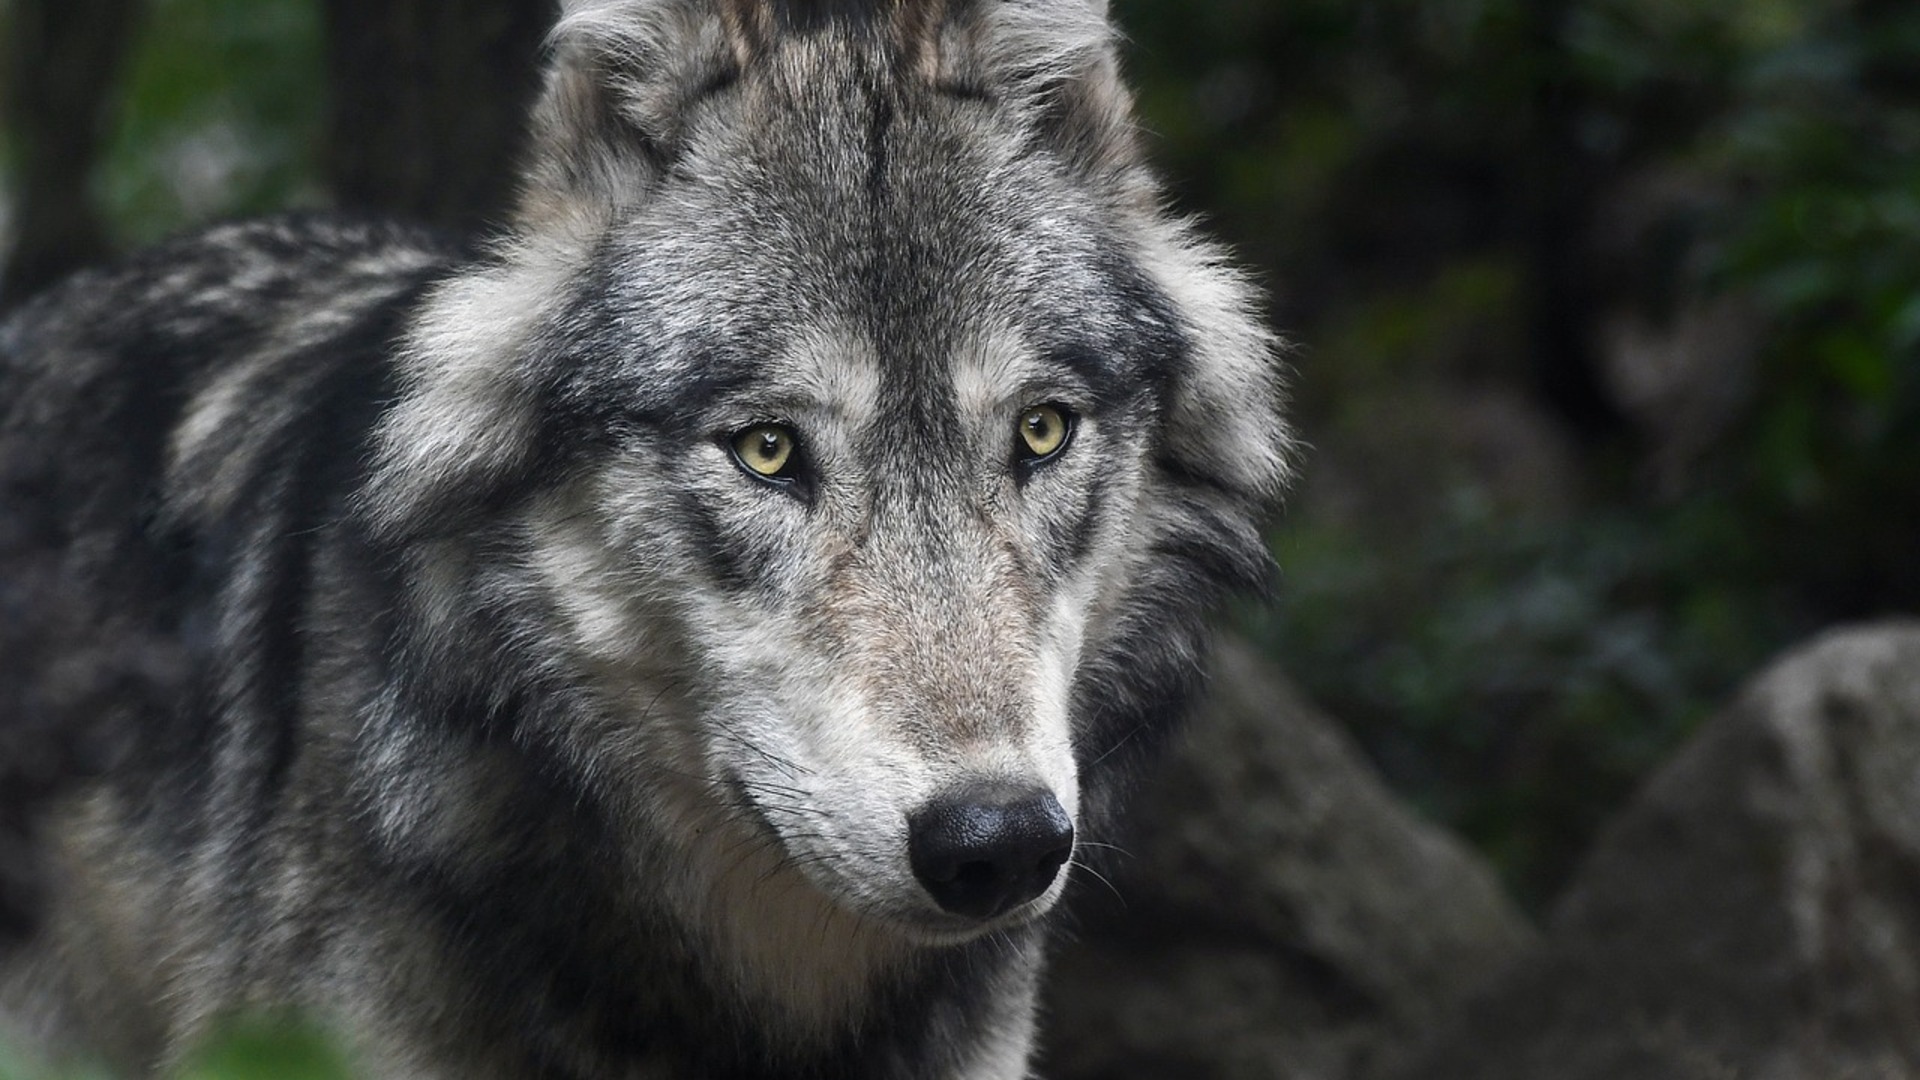 WOLFALPS EU - Coordinated actions at Alpine level to implement coexistence actions between the wolf and human activities